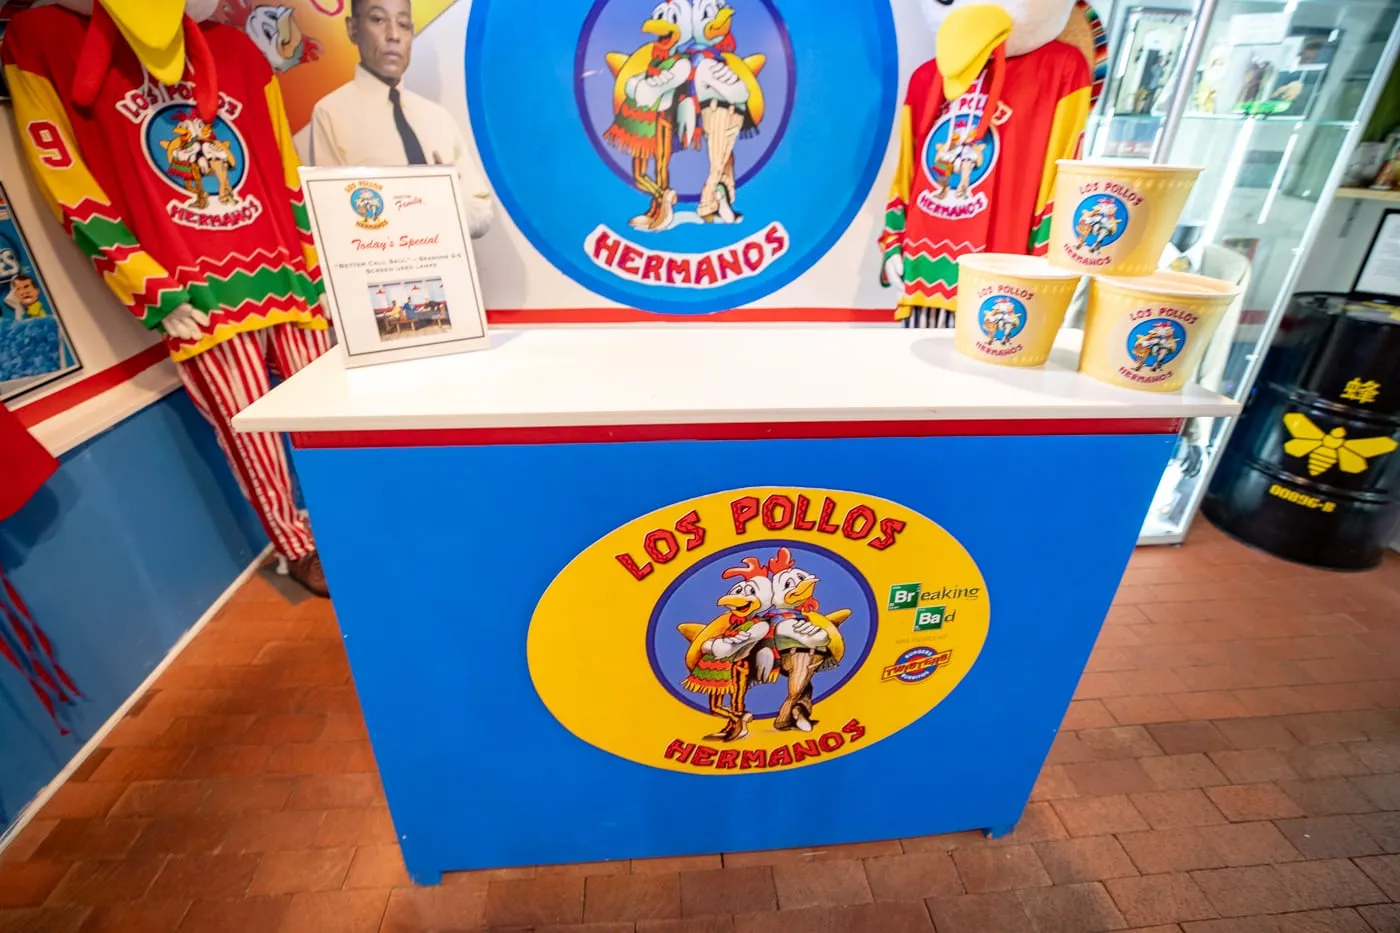 Los Pollos Hermanos fast food Photo Op at the Breaking Bad Store & Museum in Albuquerque, New Mexico